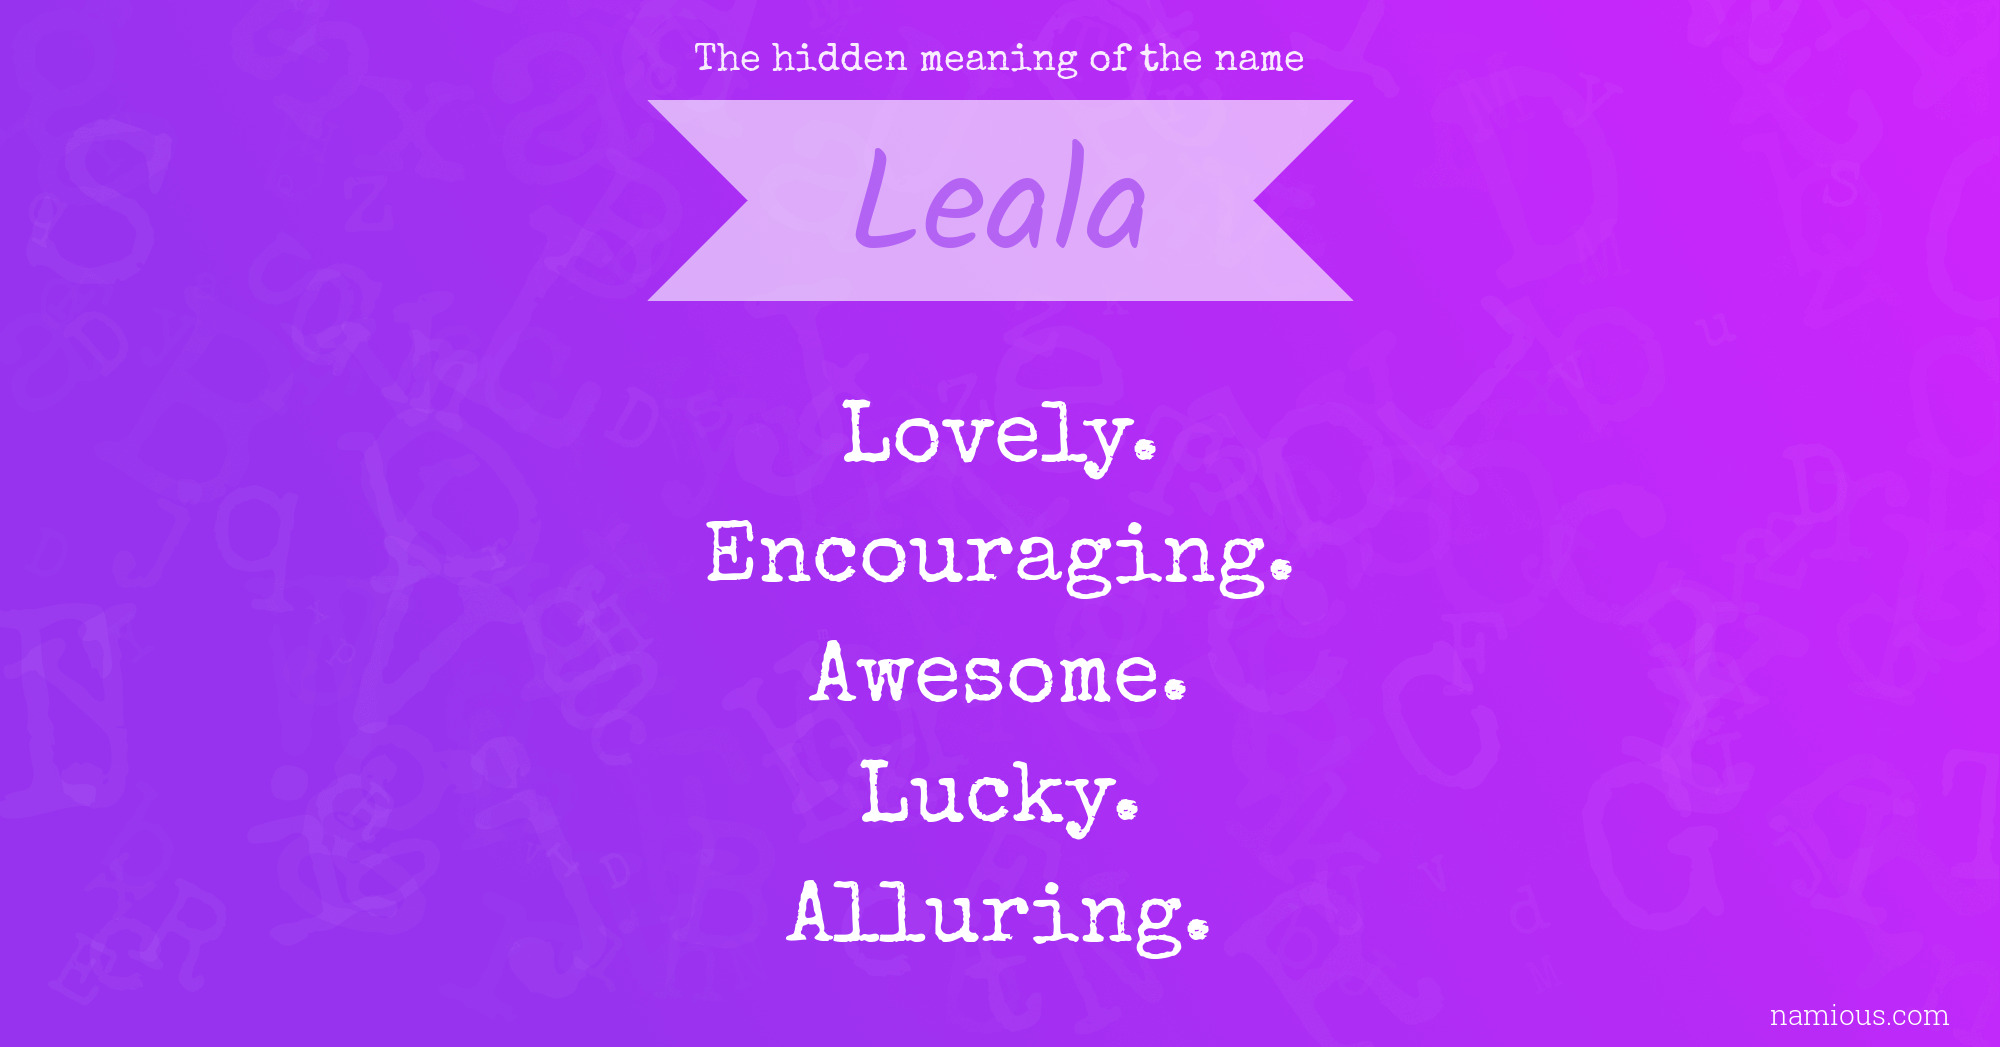 The hidden meaning of the name Leala